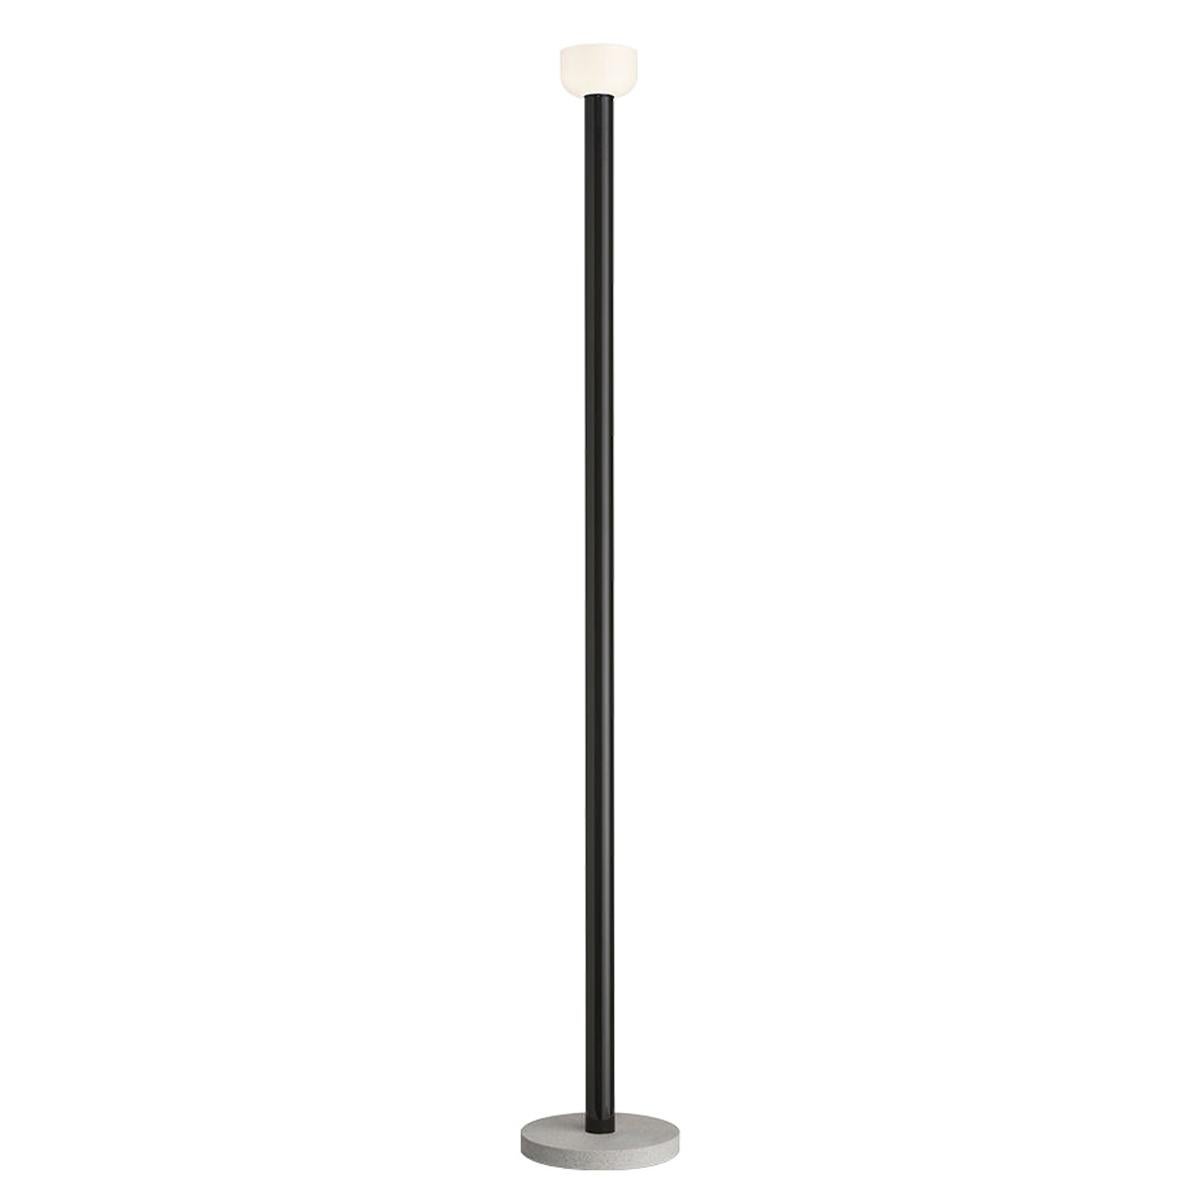 Flos Bellhop Floor Lamp in Brown Body with White Diffuser For Sale